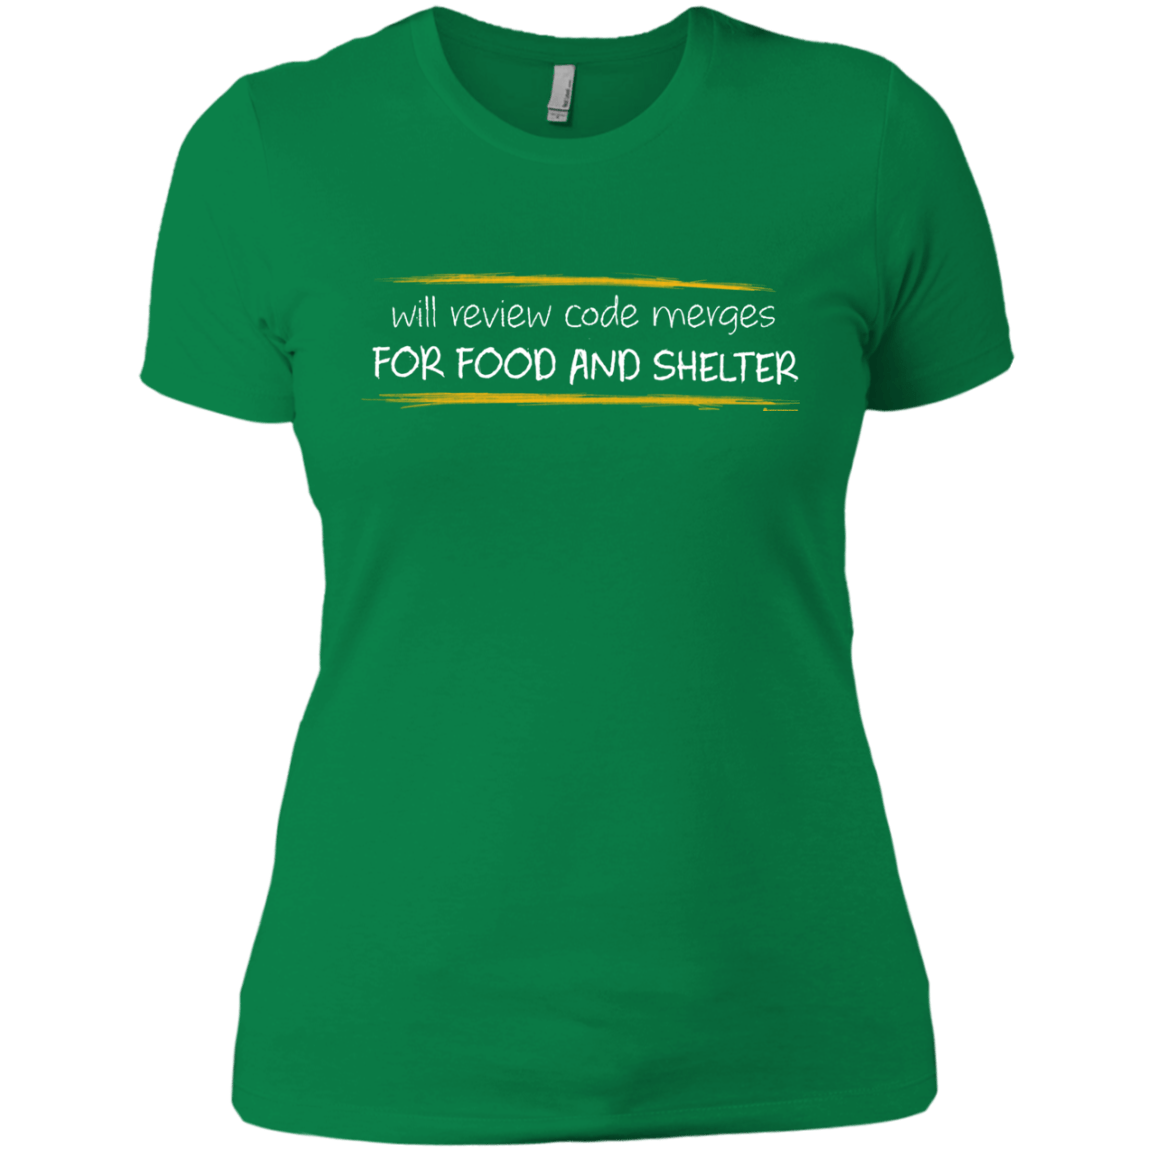 T-Shirts Kelly Green / X-Small Reviewing Code For Food And Shelter Women's Premium T-Shirt